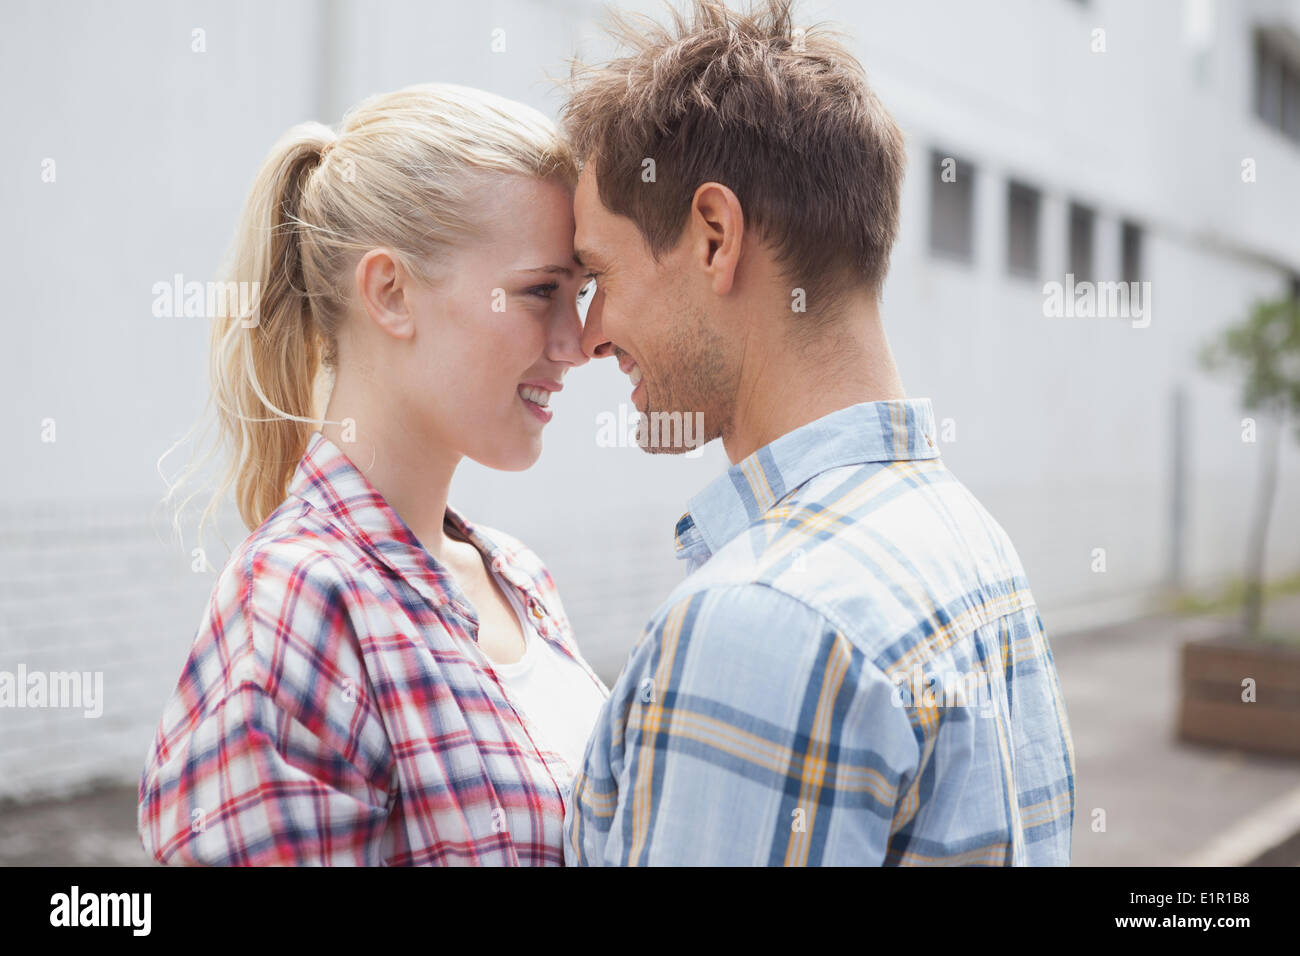 Hip young couple hugging and facing each other Stock Photo